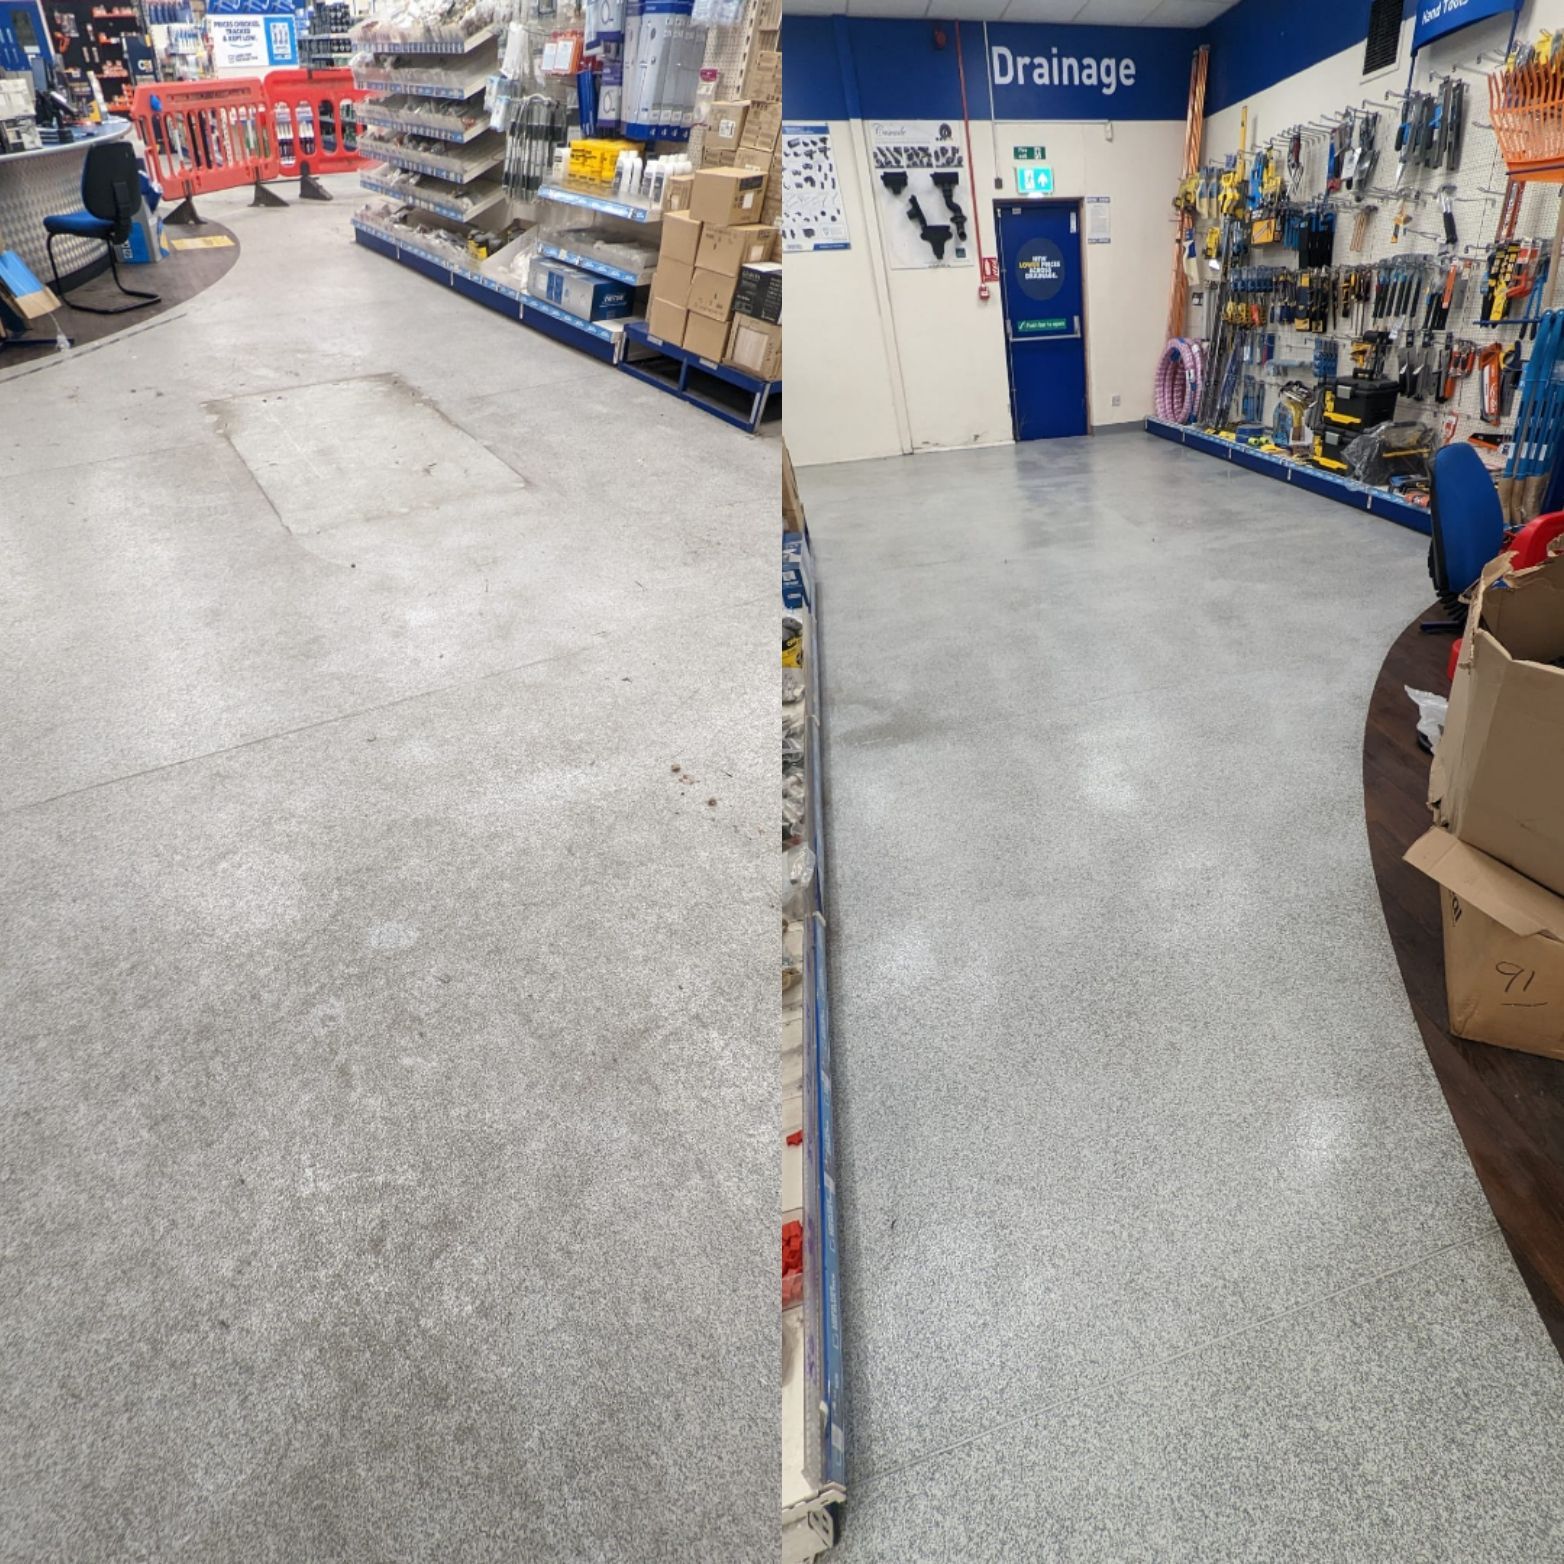 DEEP CLEANING VINYL FLOORING AT A BUILDER'S MERCHANT IN CHESTER